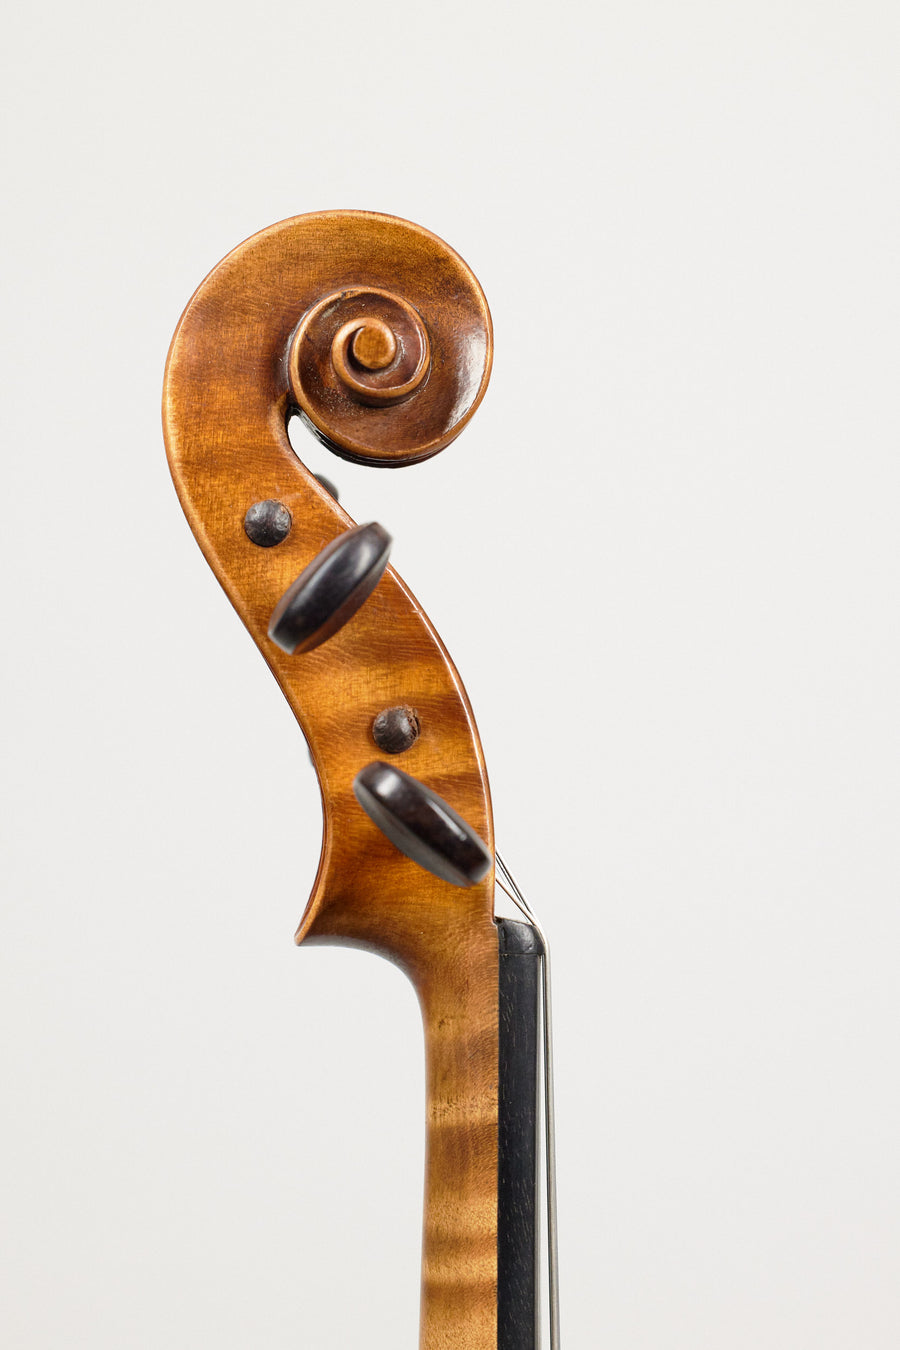 A French Violin Marketed By Williams & Sons in Toronto, Early 20th Century